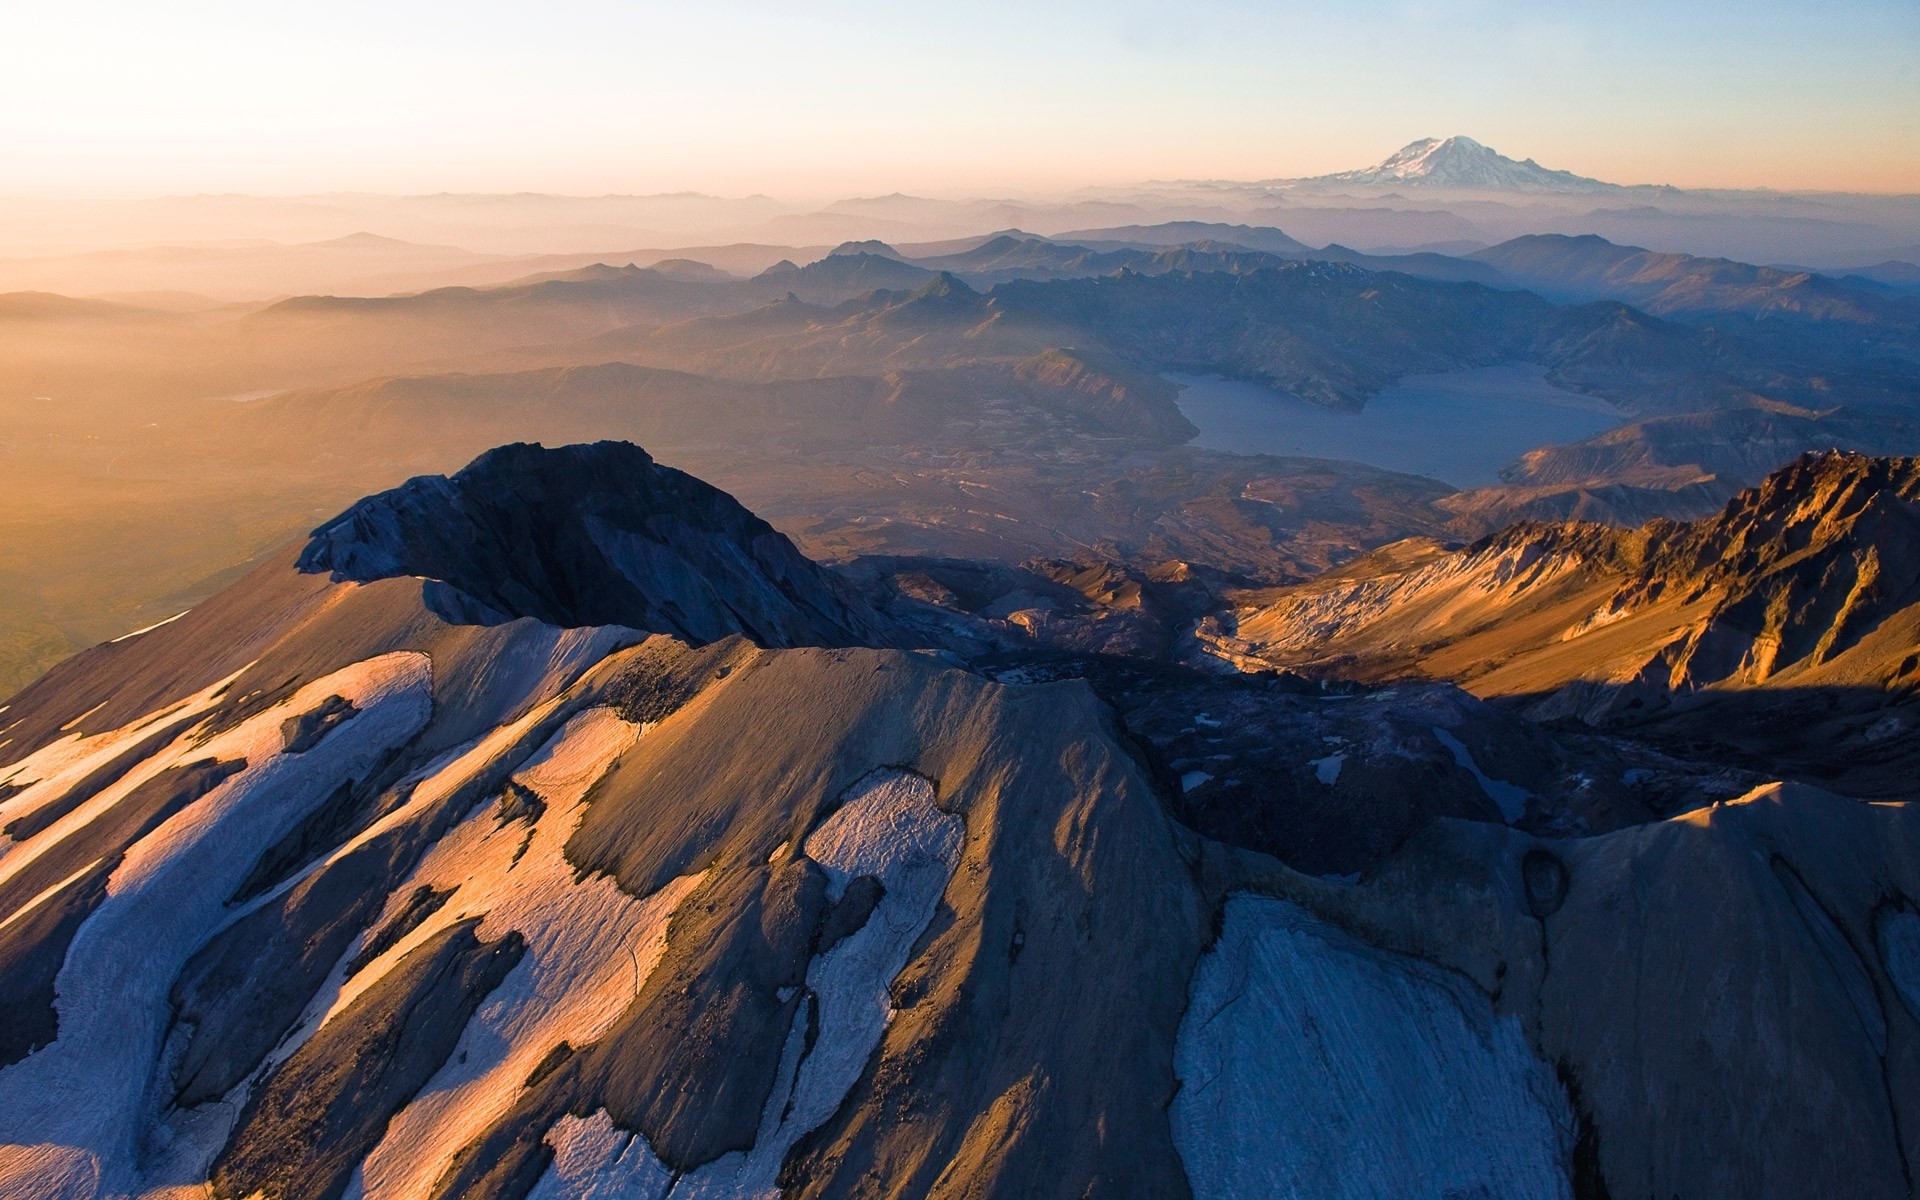 General 1920x1200 mountains Mount St.  Helens lake snowy peak mist volcano Washington (state) nature landscape morning aerial view